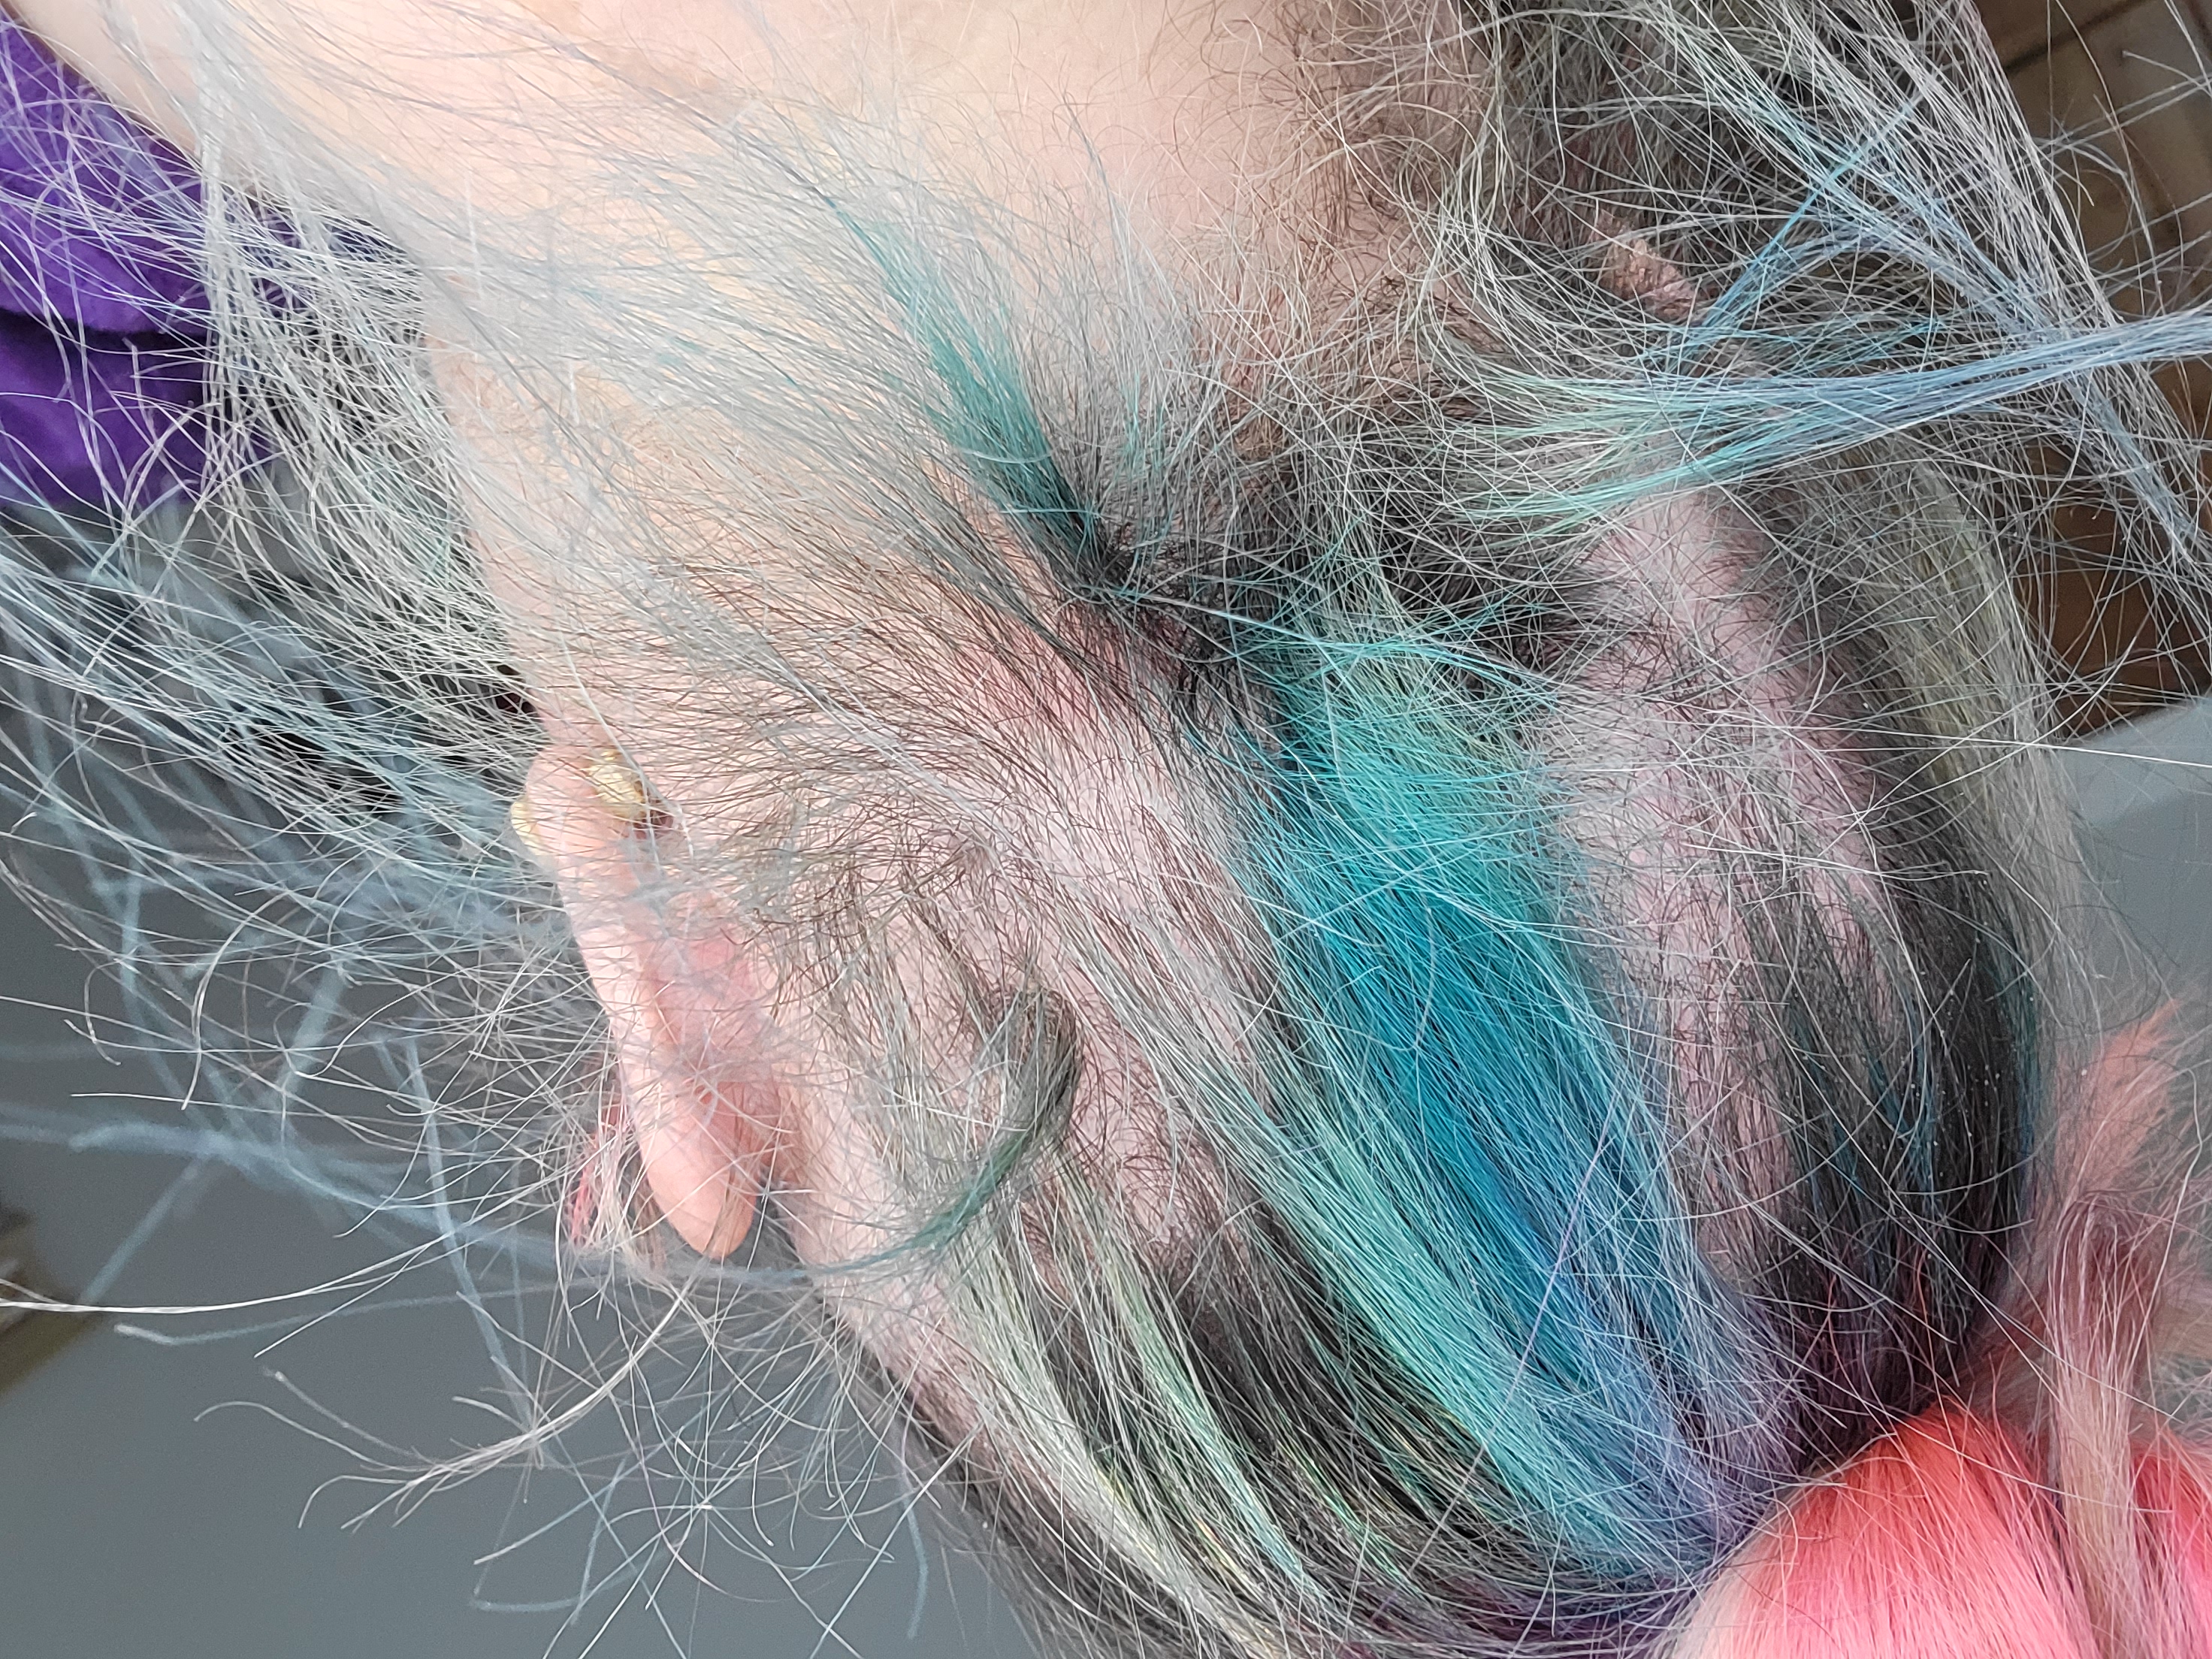 The back of a womans head, showing the patches where her hair has started falling out from chemotherapy.